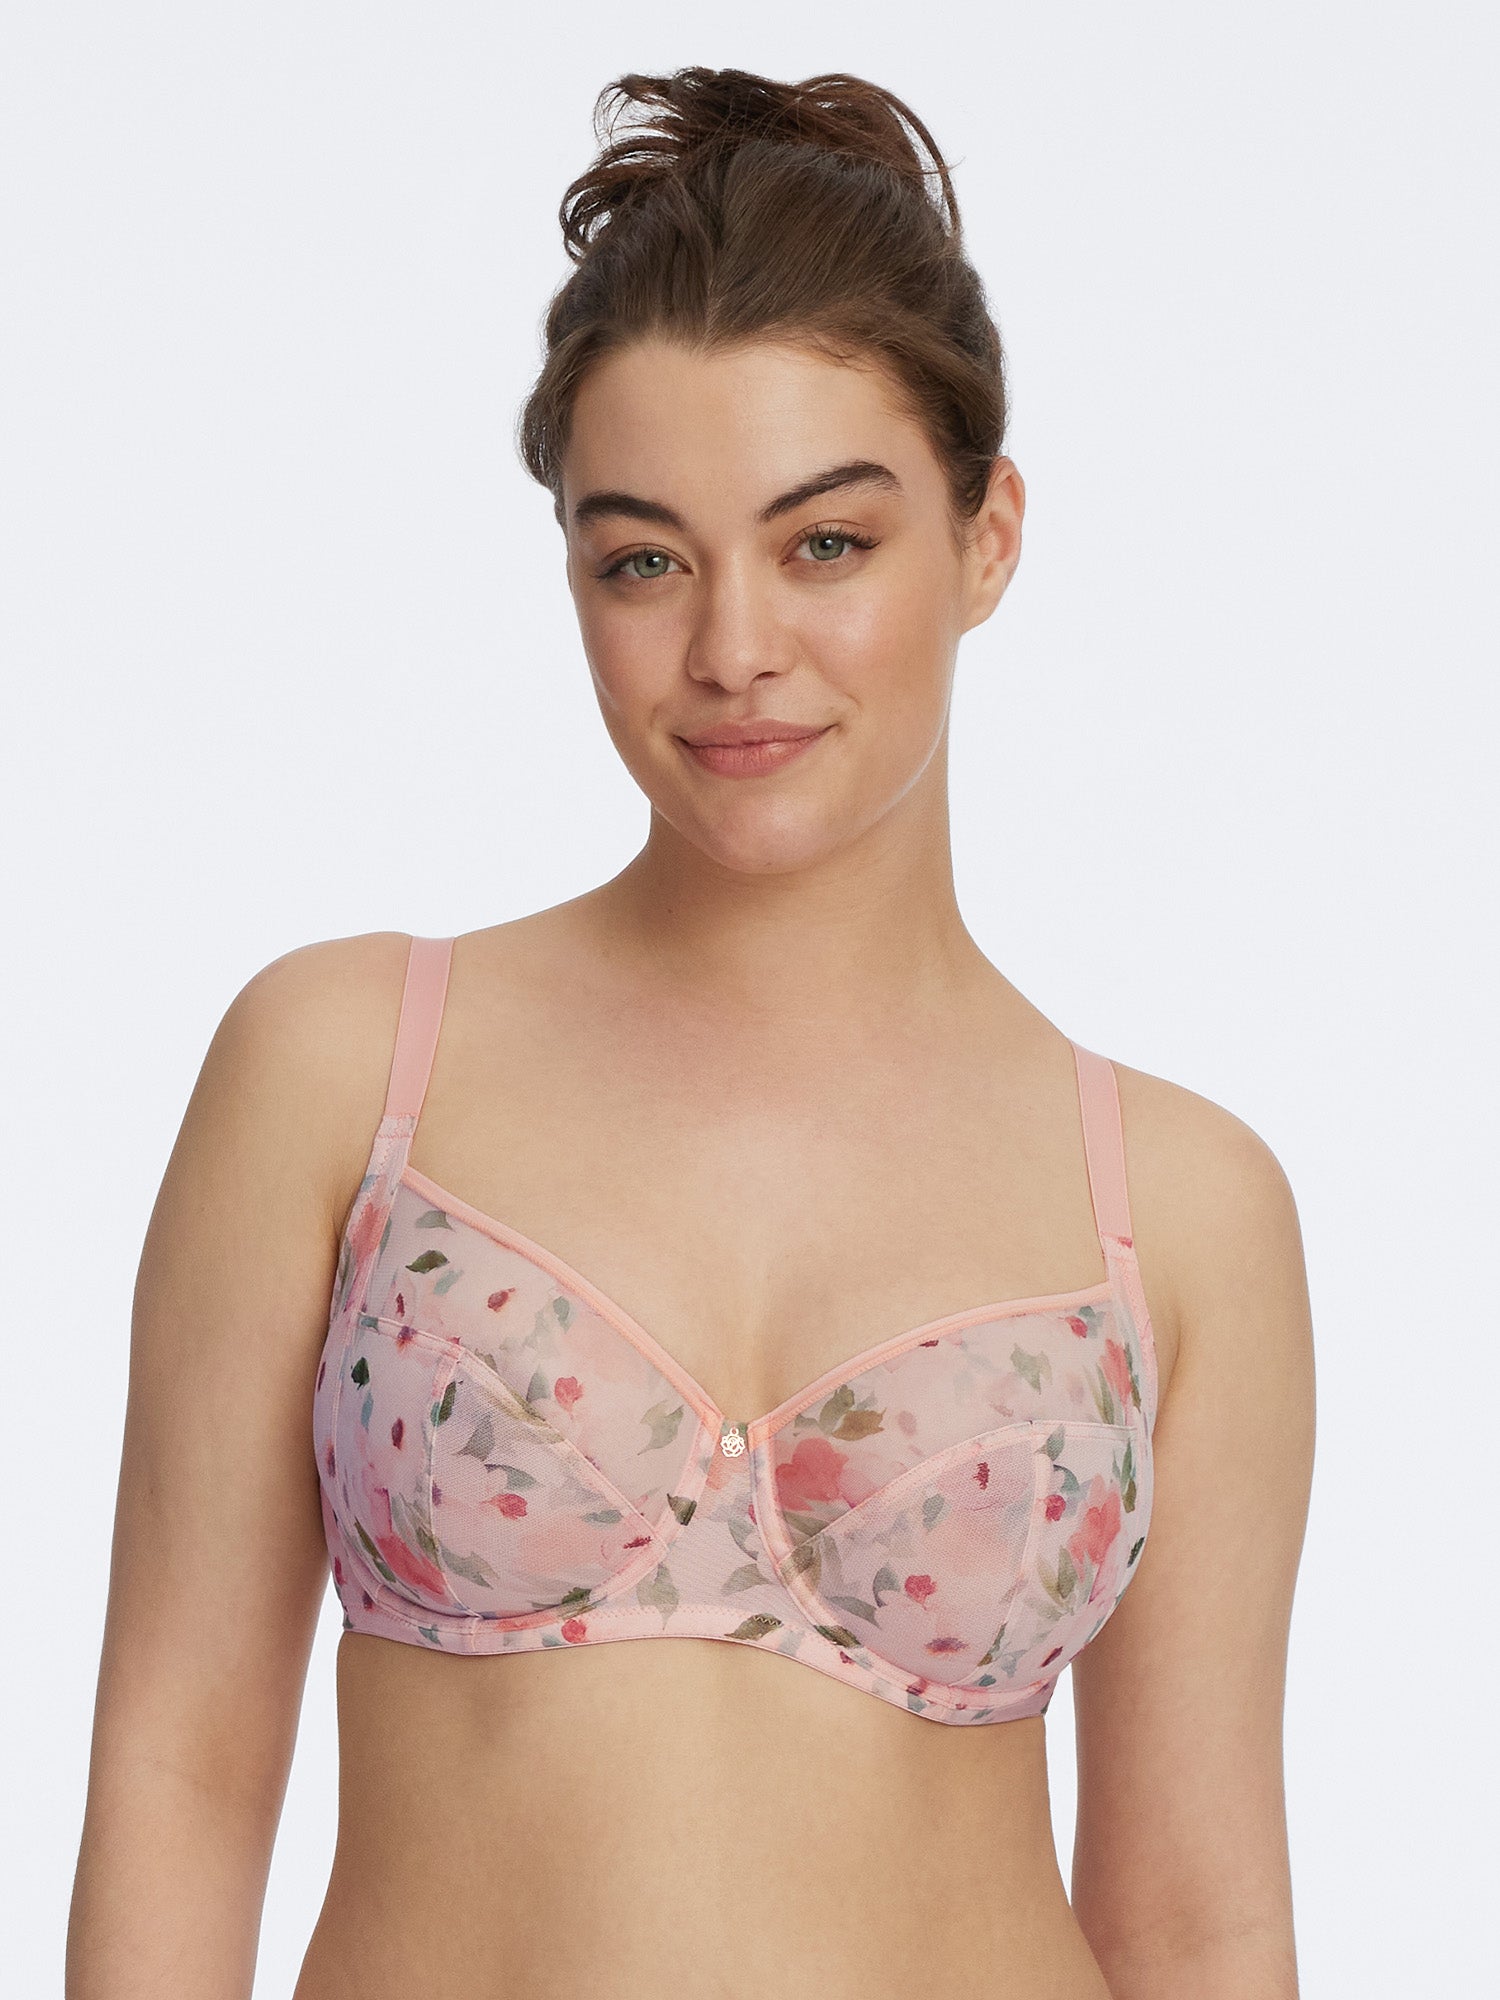 Your Favourite AAA, AA & A Cup Bras in 2020 – Little Women